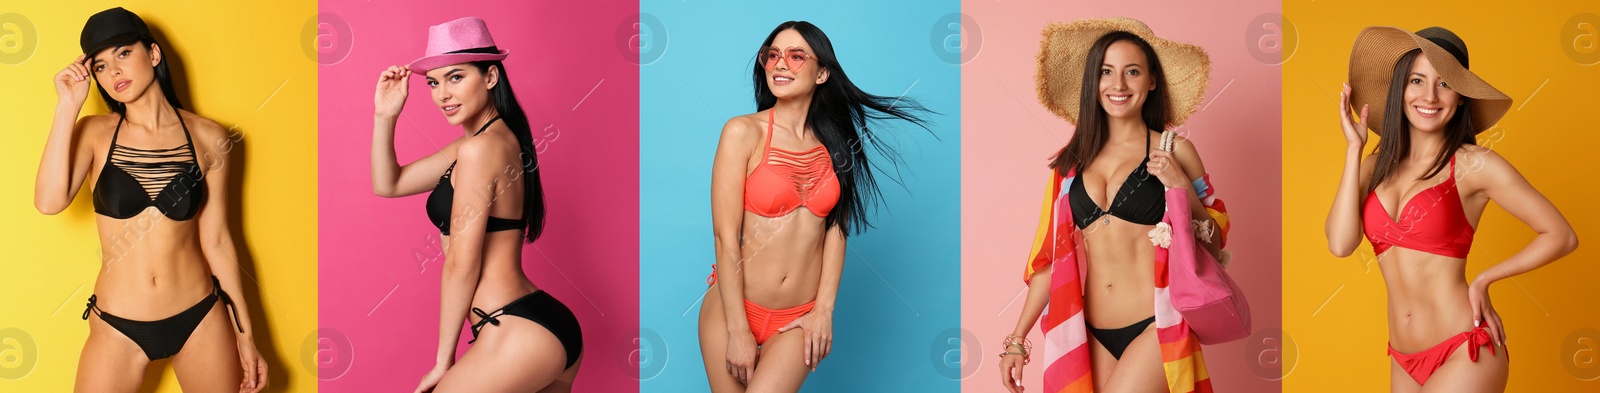 Image of Collage with photos of women wearing bikini on different color backgrounds. Banner design